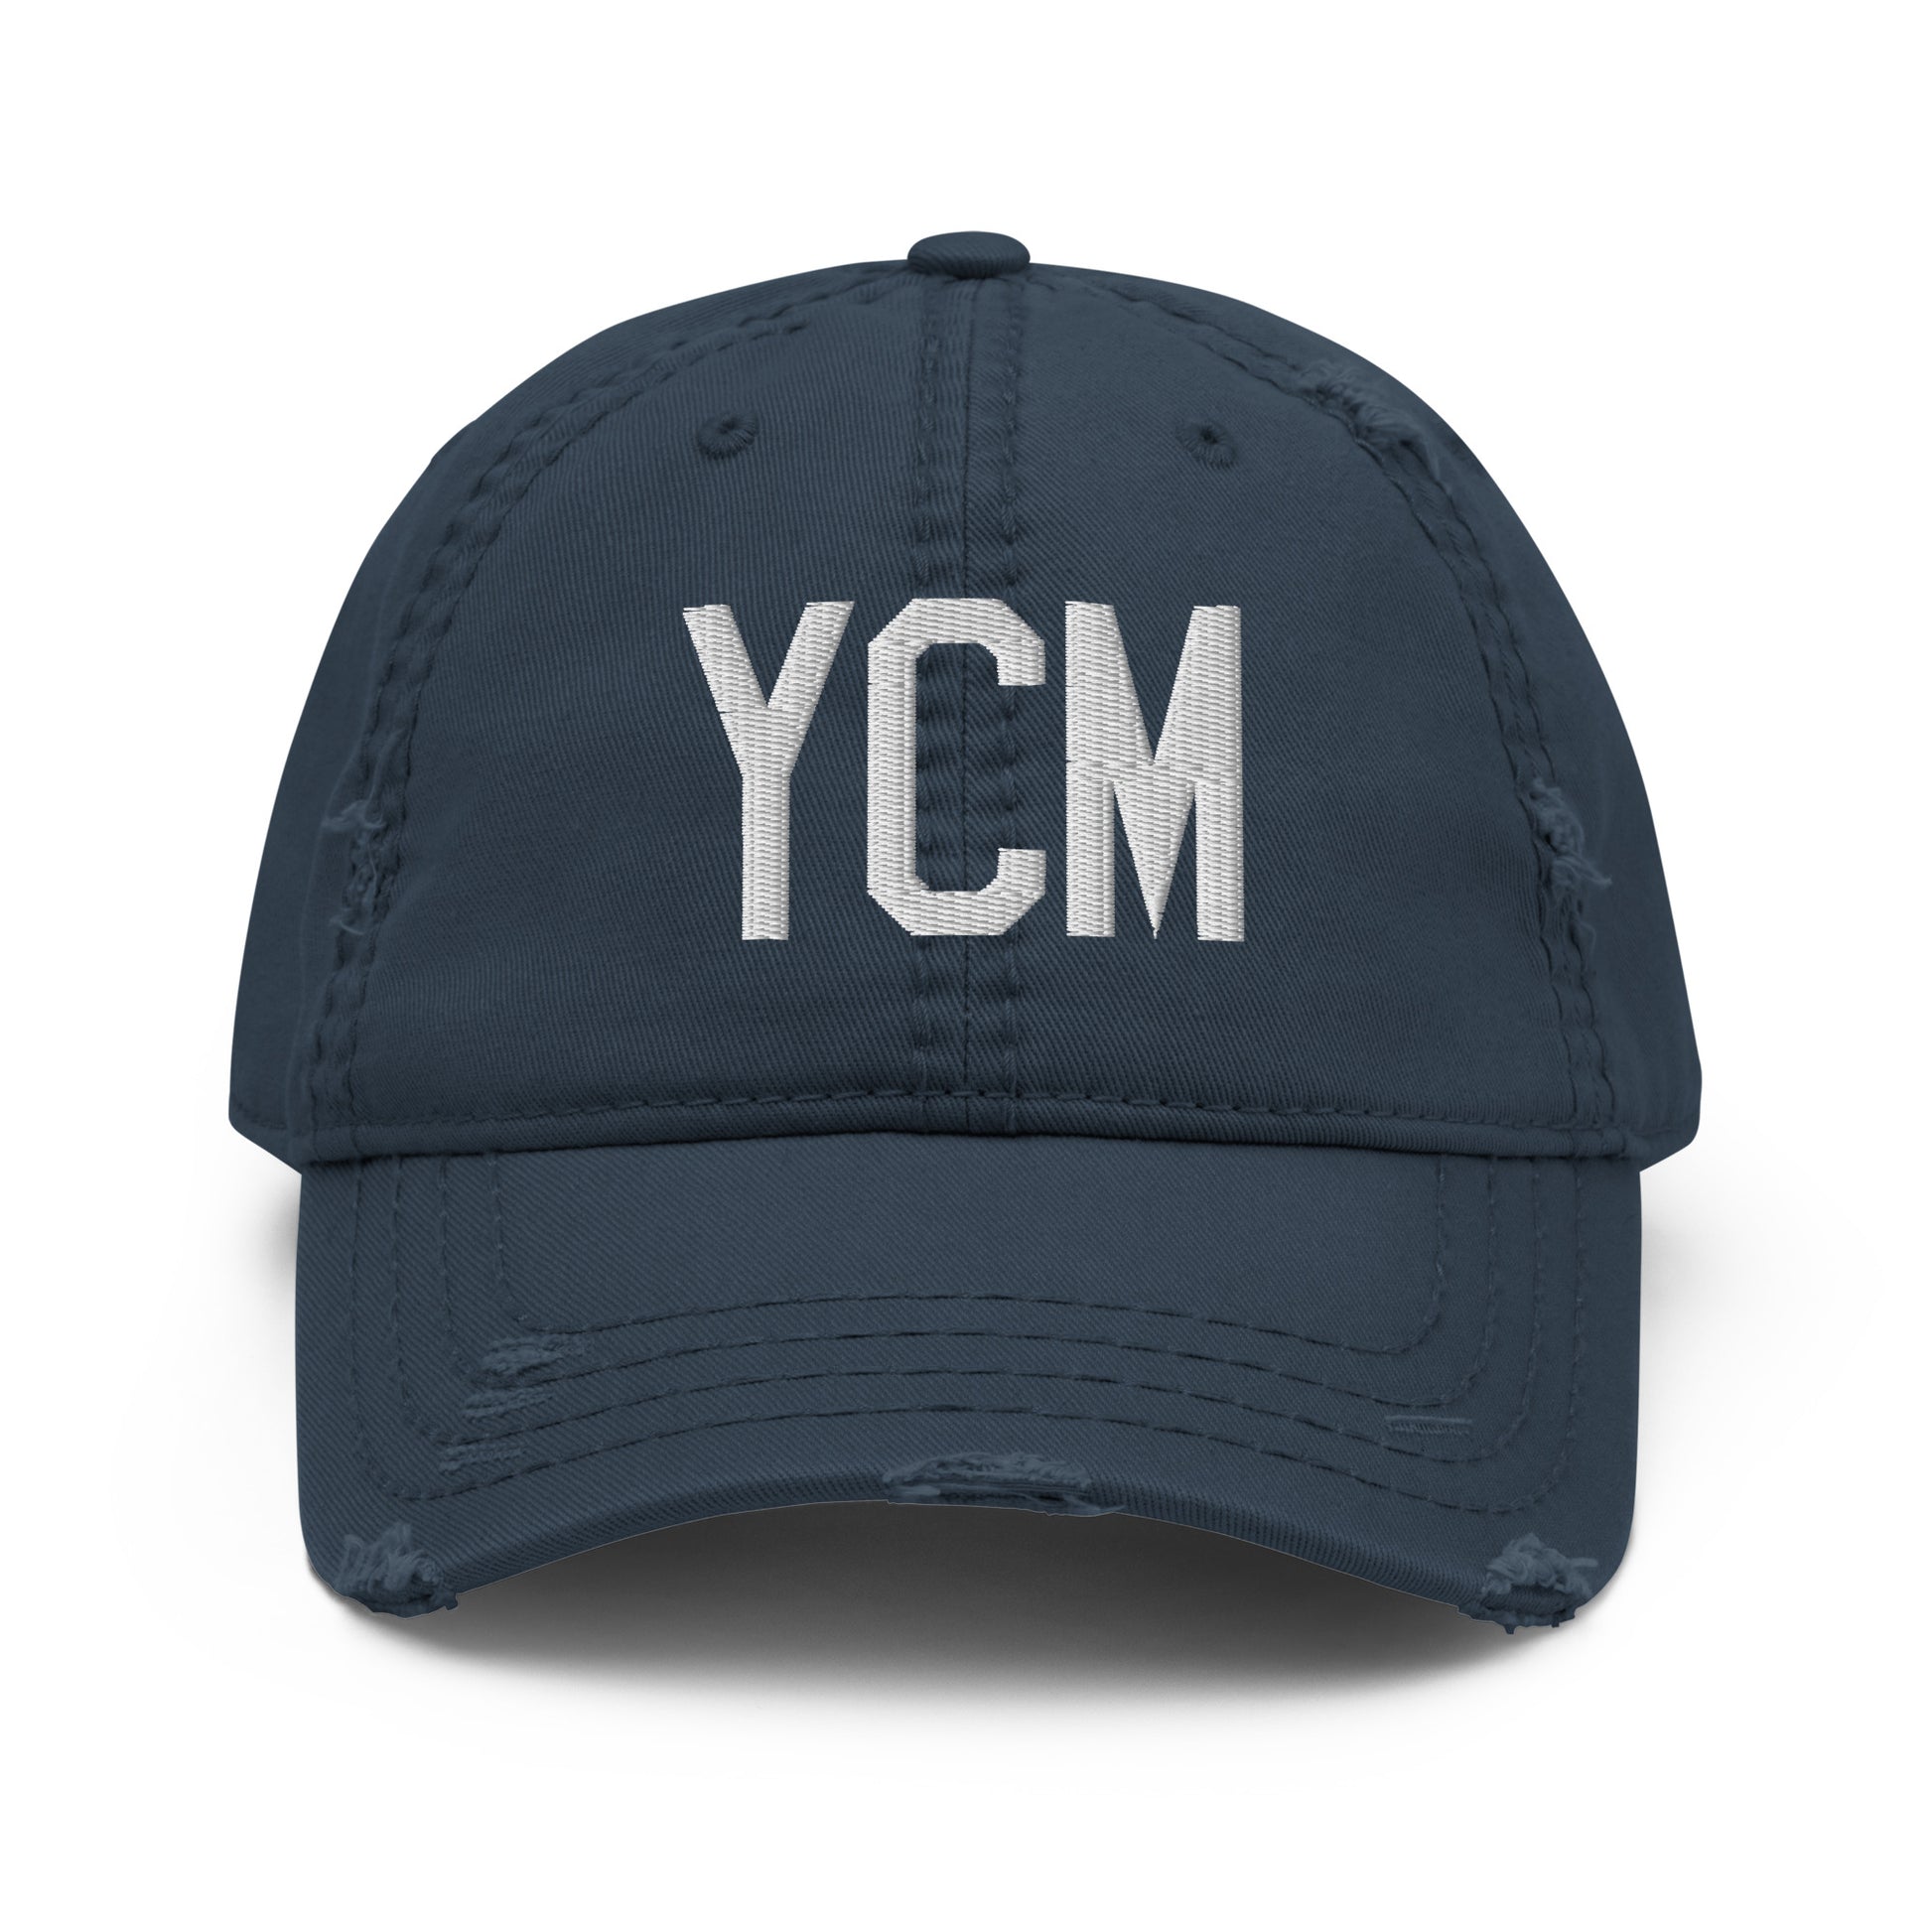 Airport Code Distressed Hat - White • YCM St. Catharines • YHM Designs - Image 13